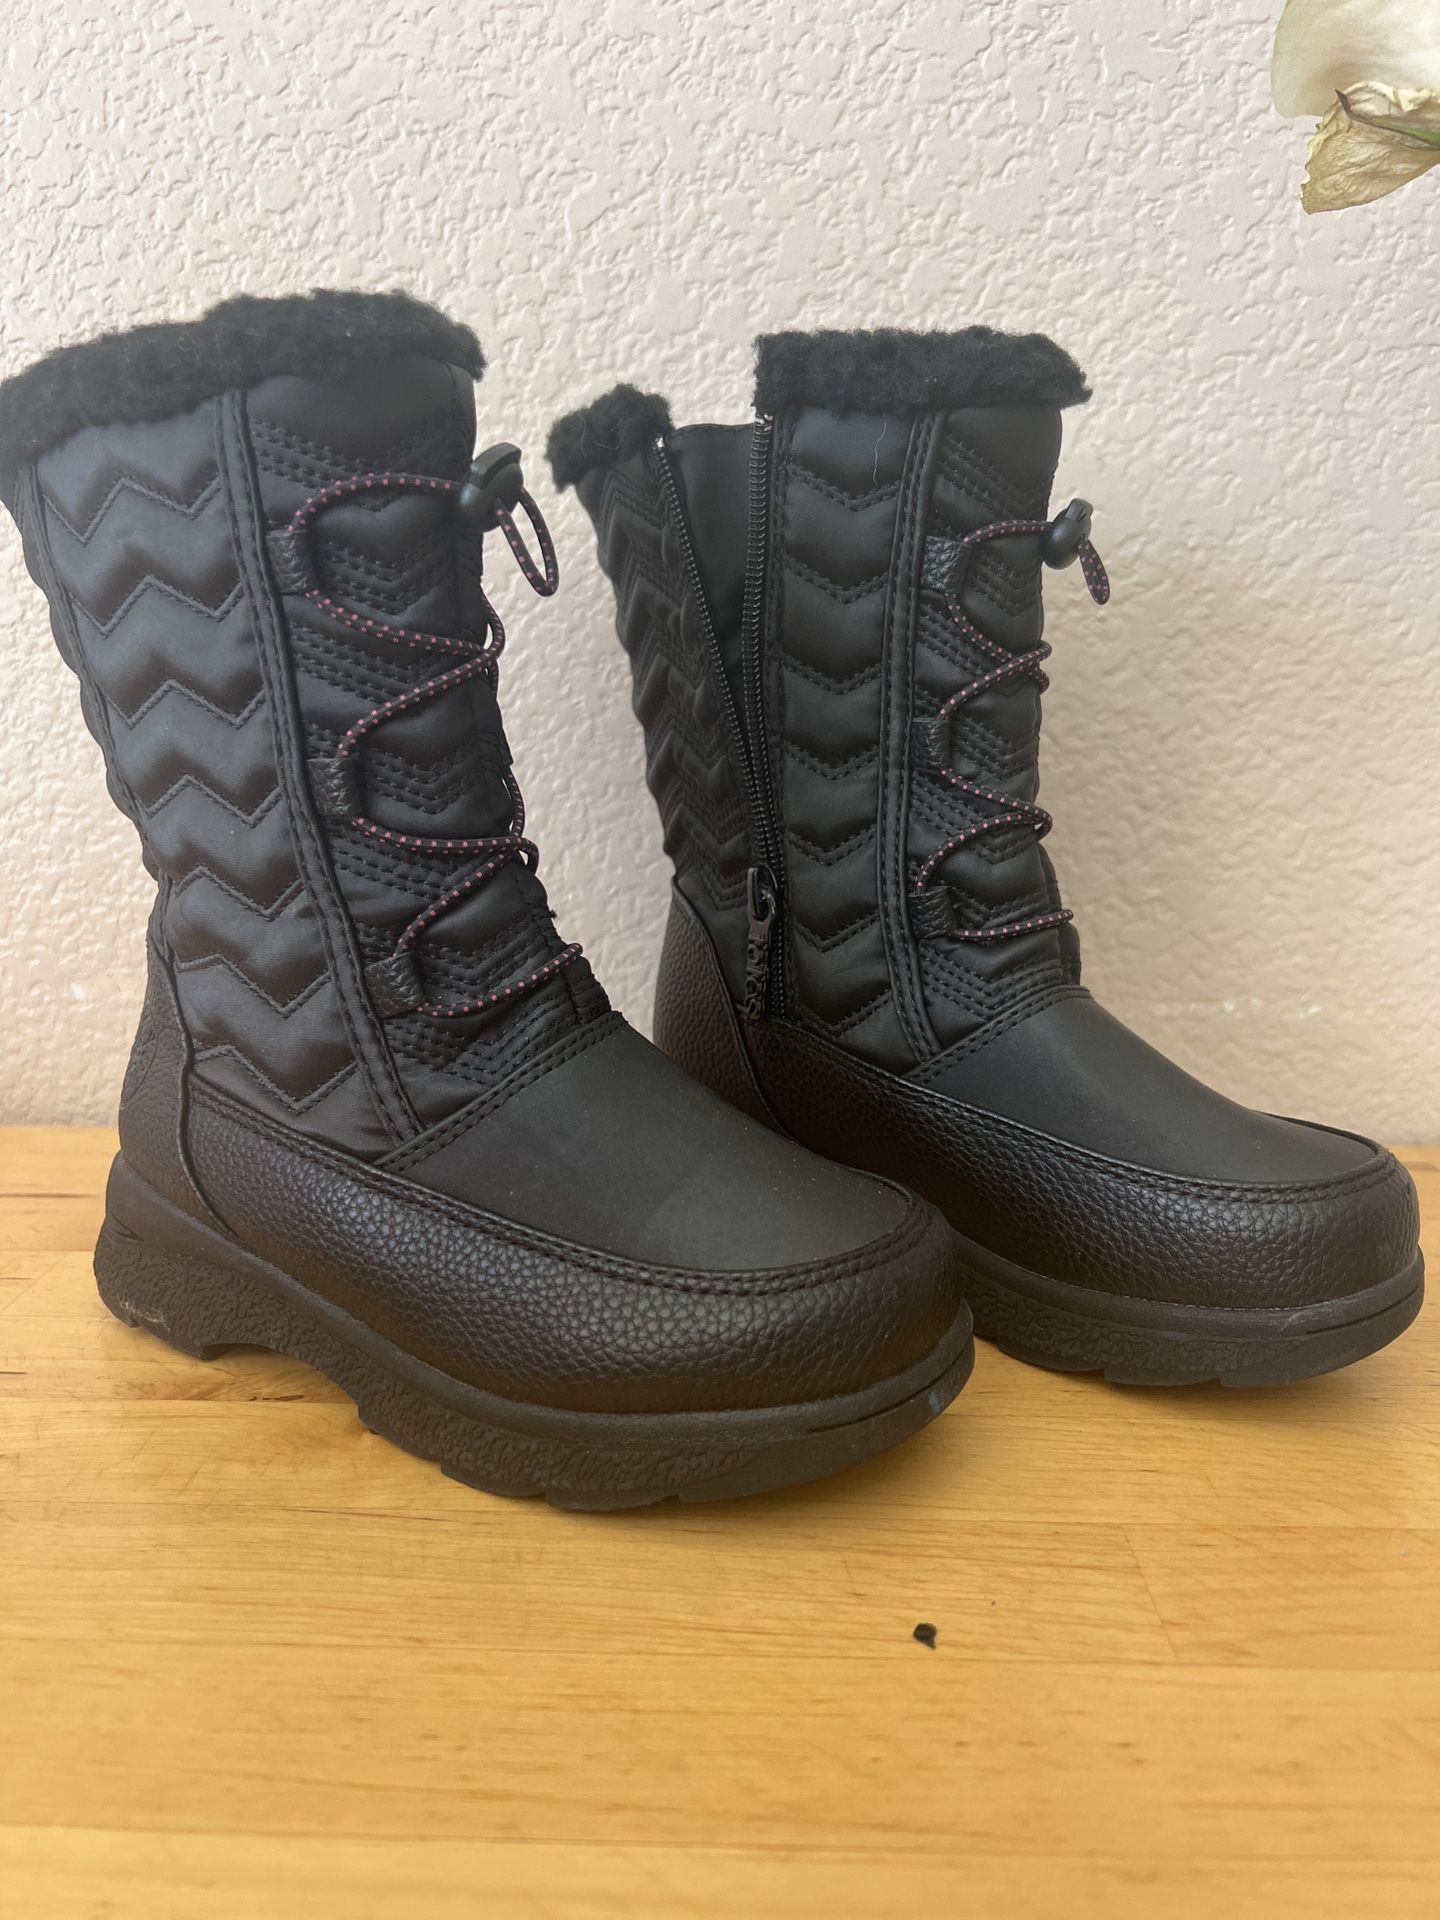 Totes Winter Boots 13M